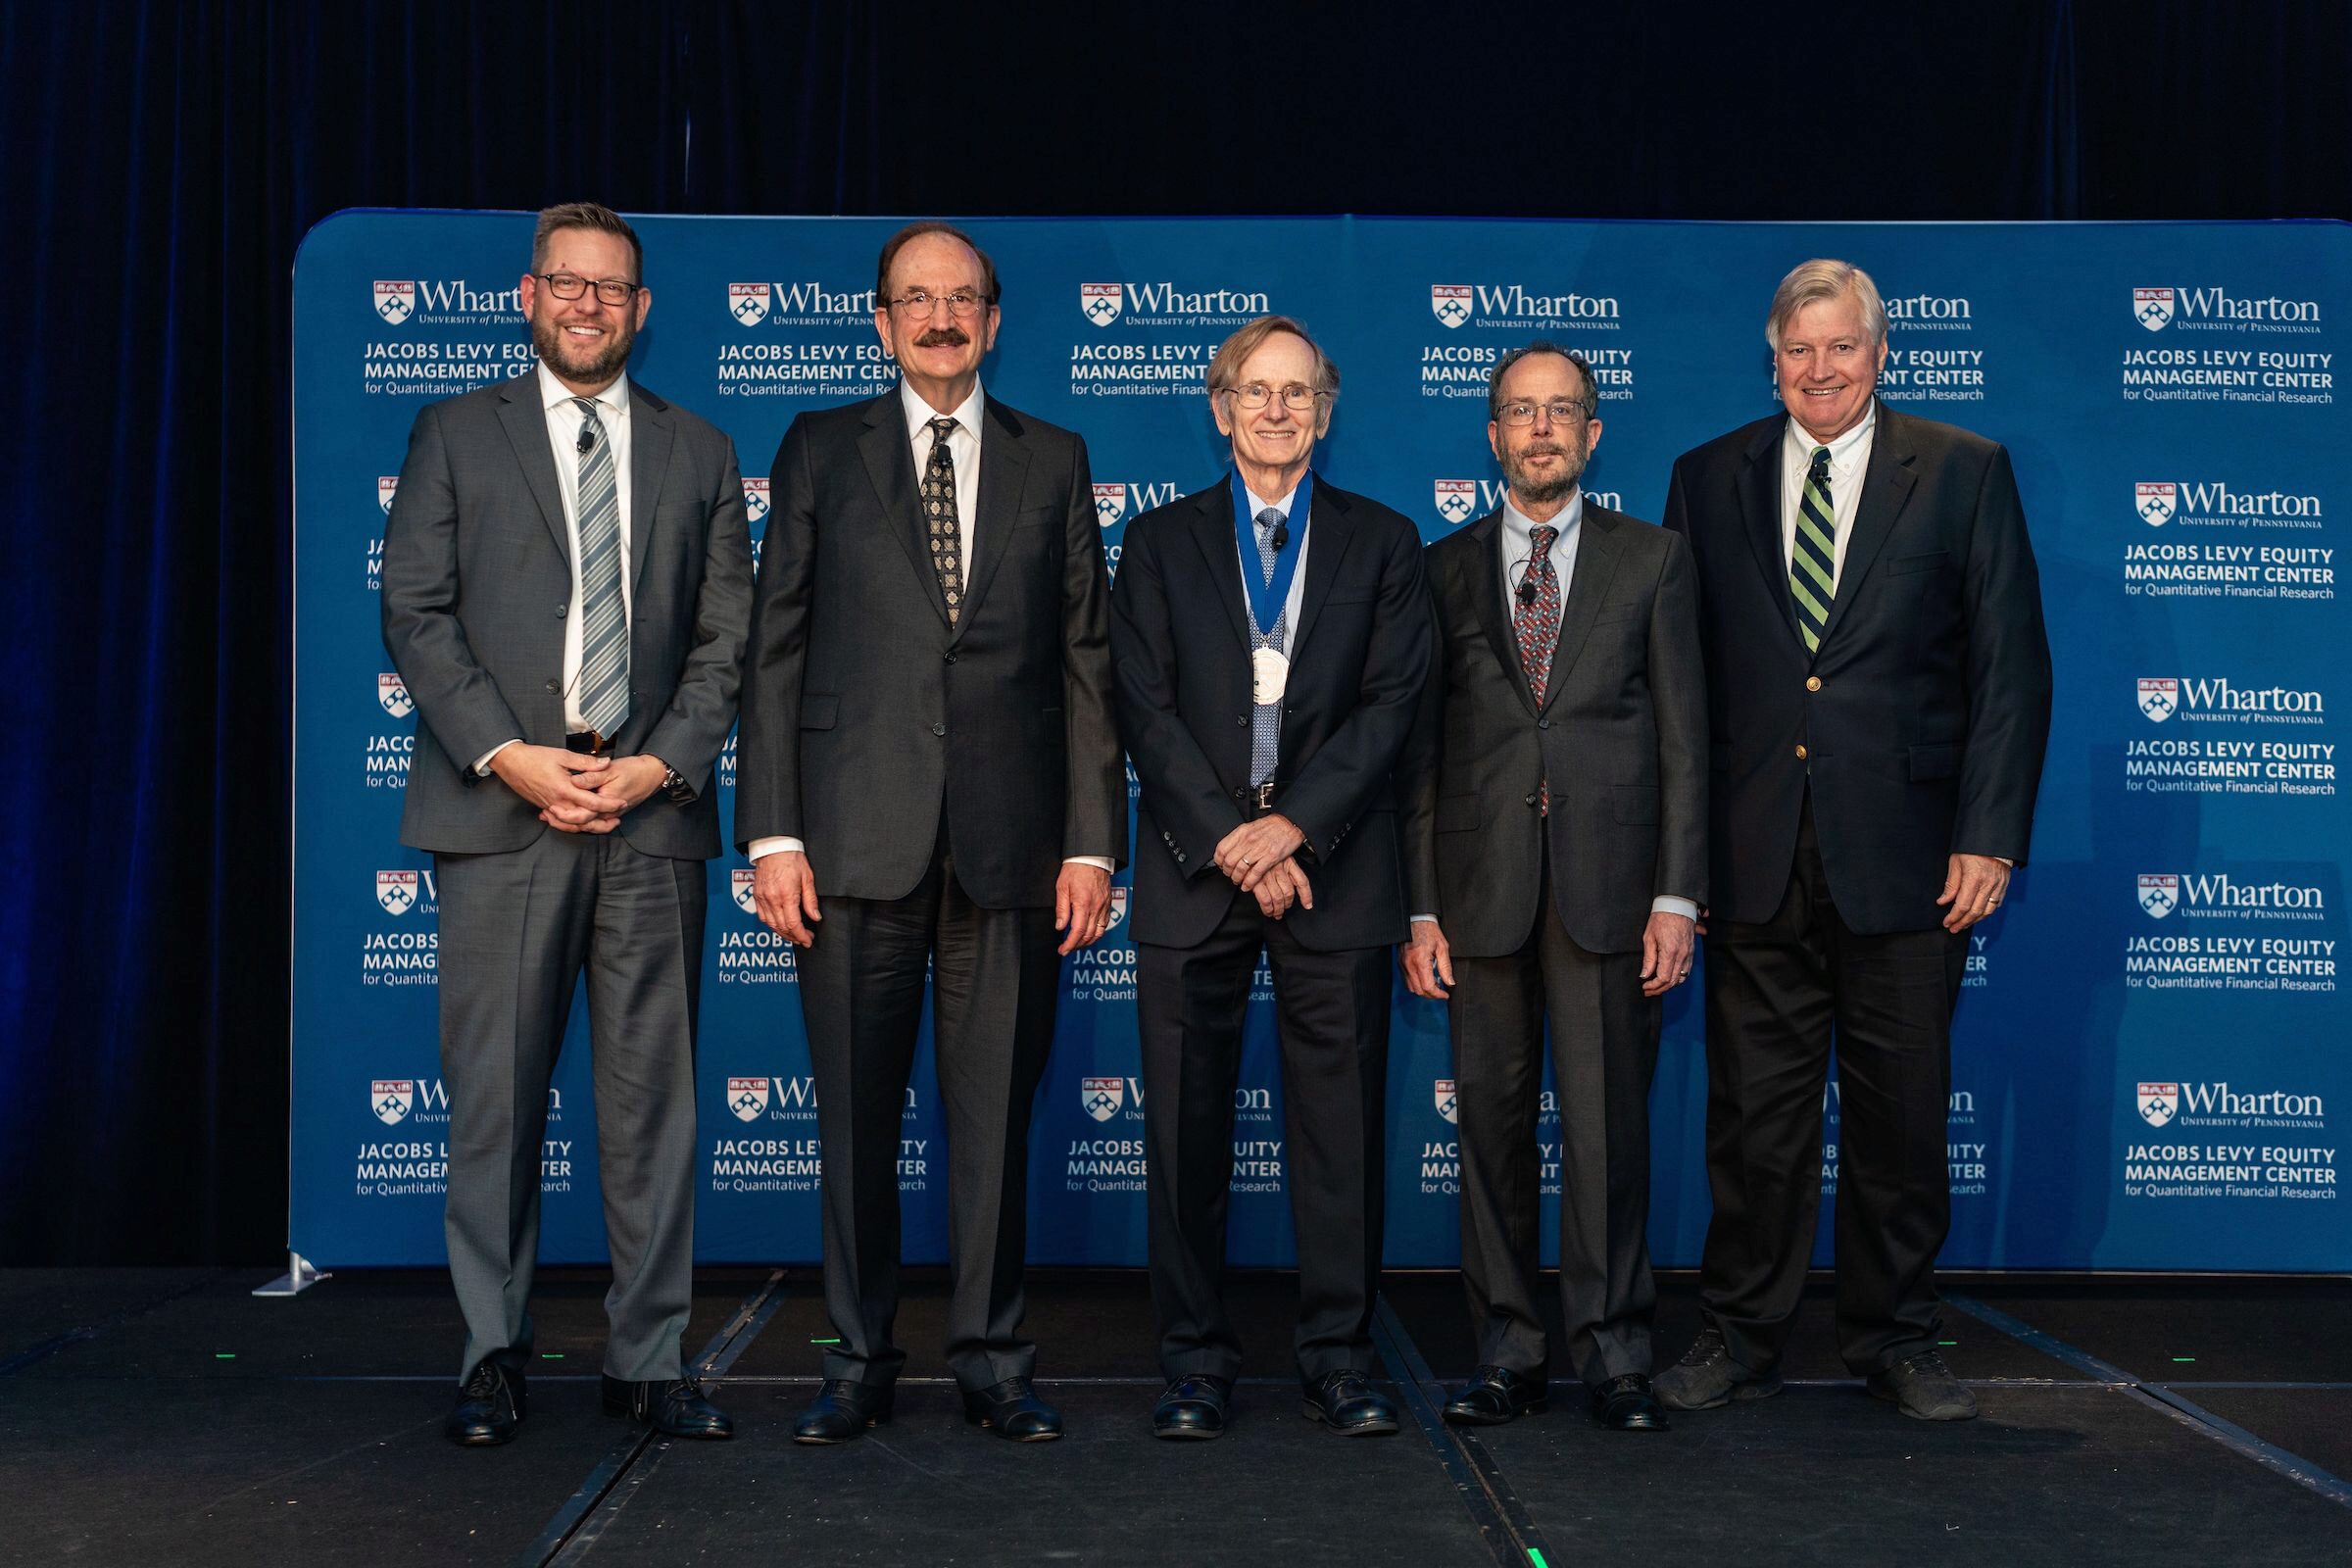 Albert S. “Pete” Kyle poses and smiles, wearing the Jacobs Levy Prize medal, between Christopher Geczy, Bruce Jacobs, Ken Levy, and Craig MacKinlay